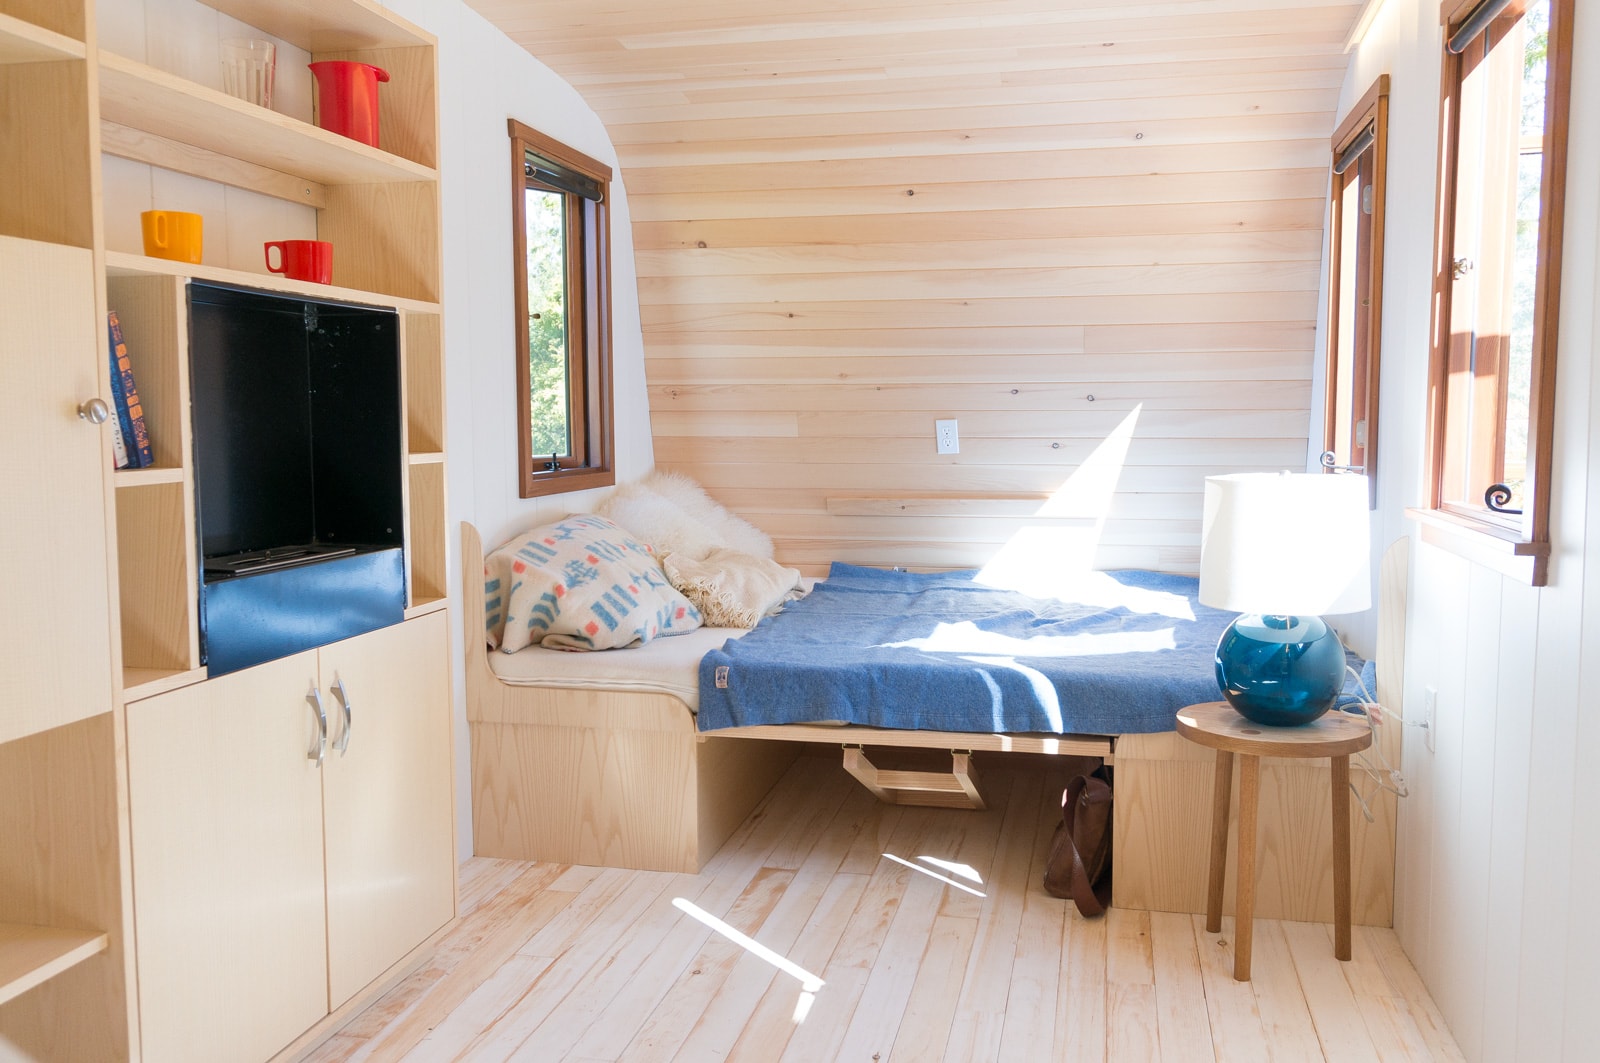 Interior of a tiny home that has wood on the floors and ceiling, matching the white walls and wood furniture.